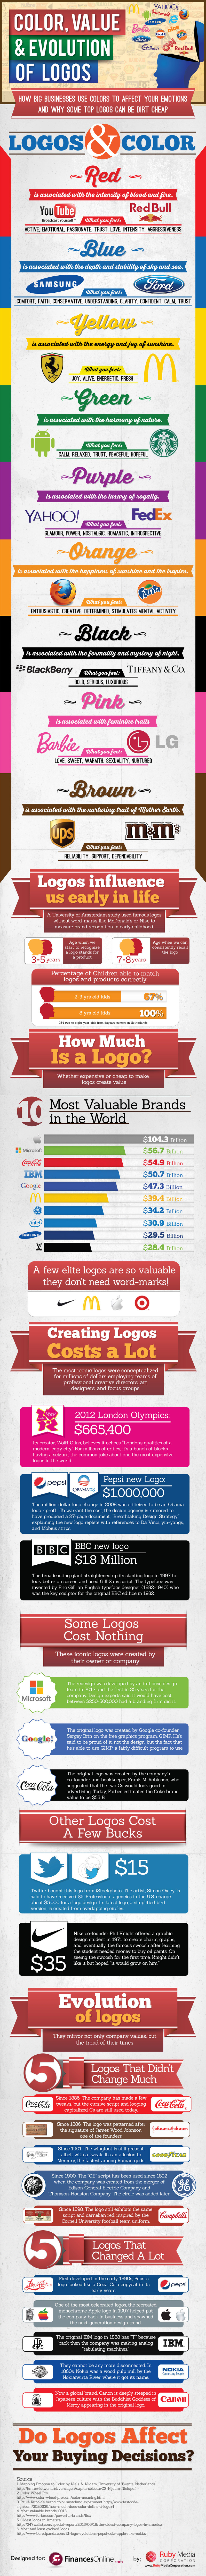 color-logo-business-infographic